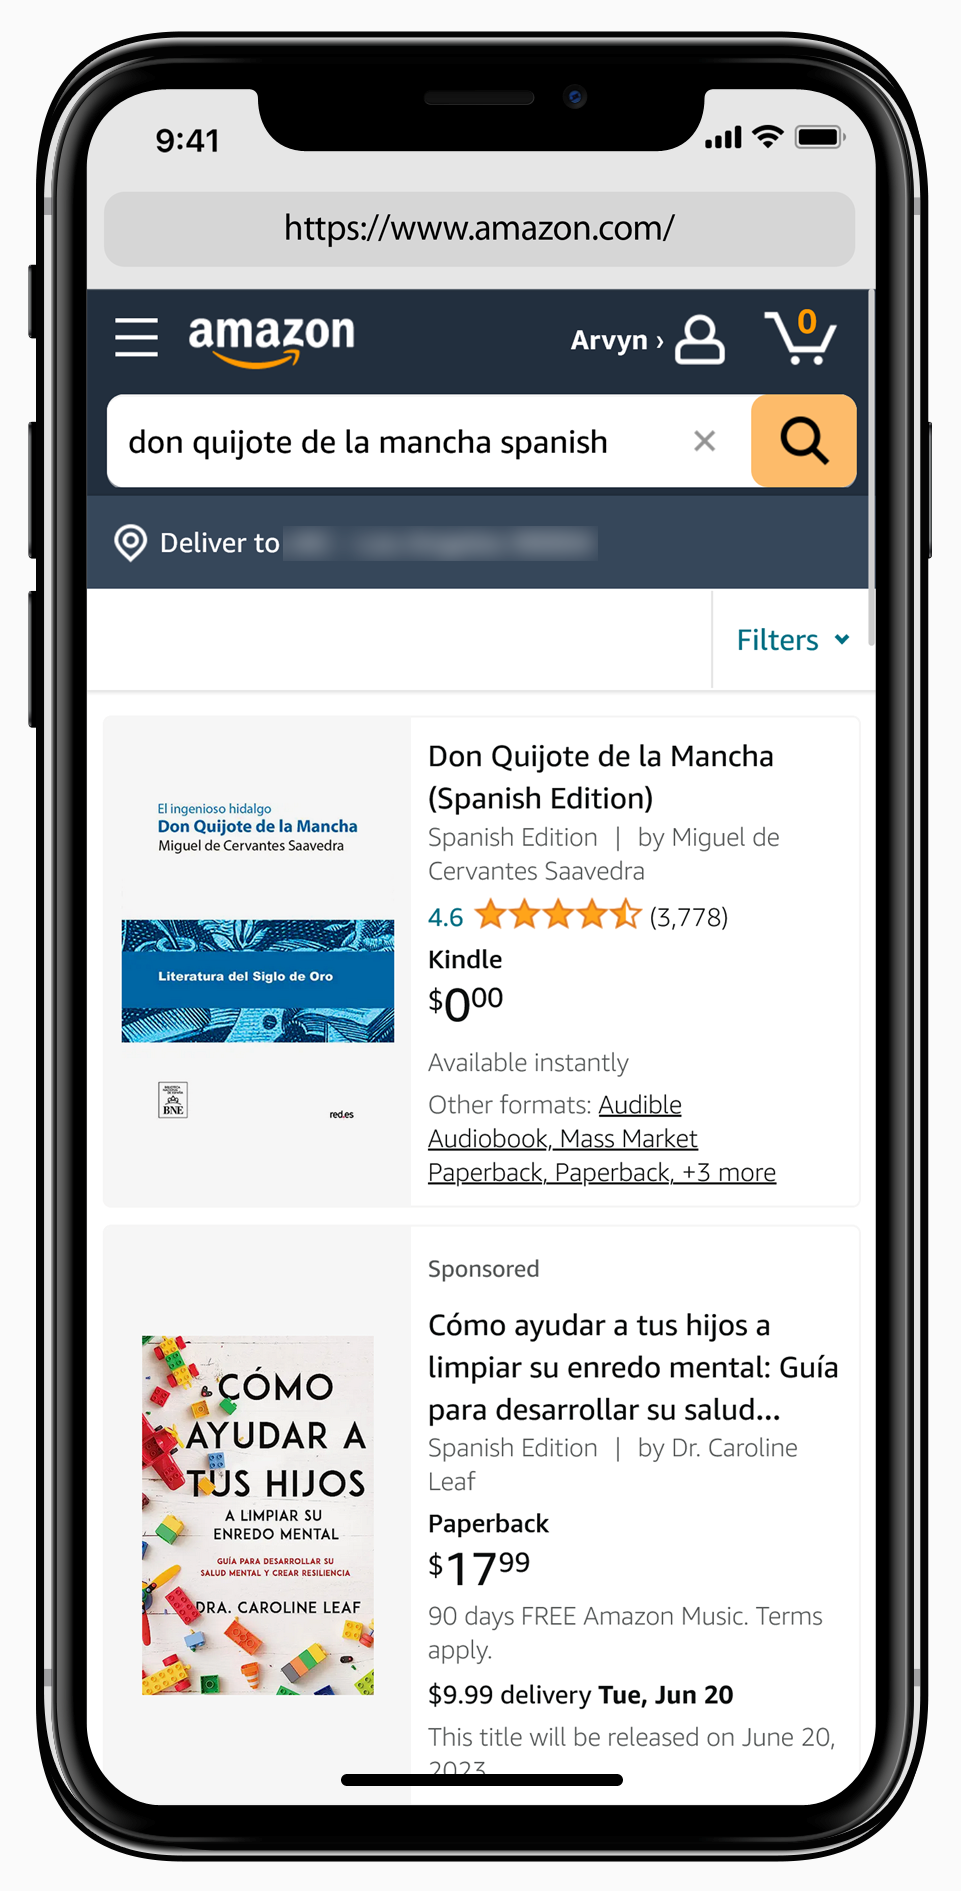 Amazon Kindle Store Search Results for Don Quijote in Spanish on an iPhone